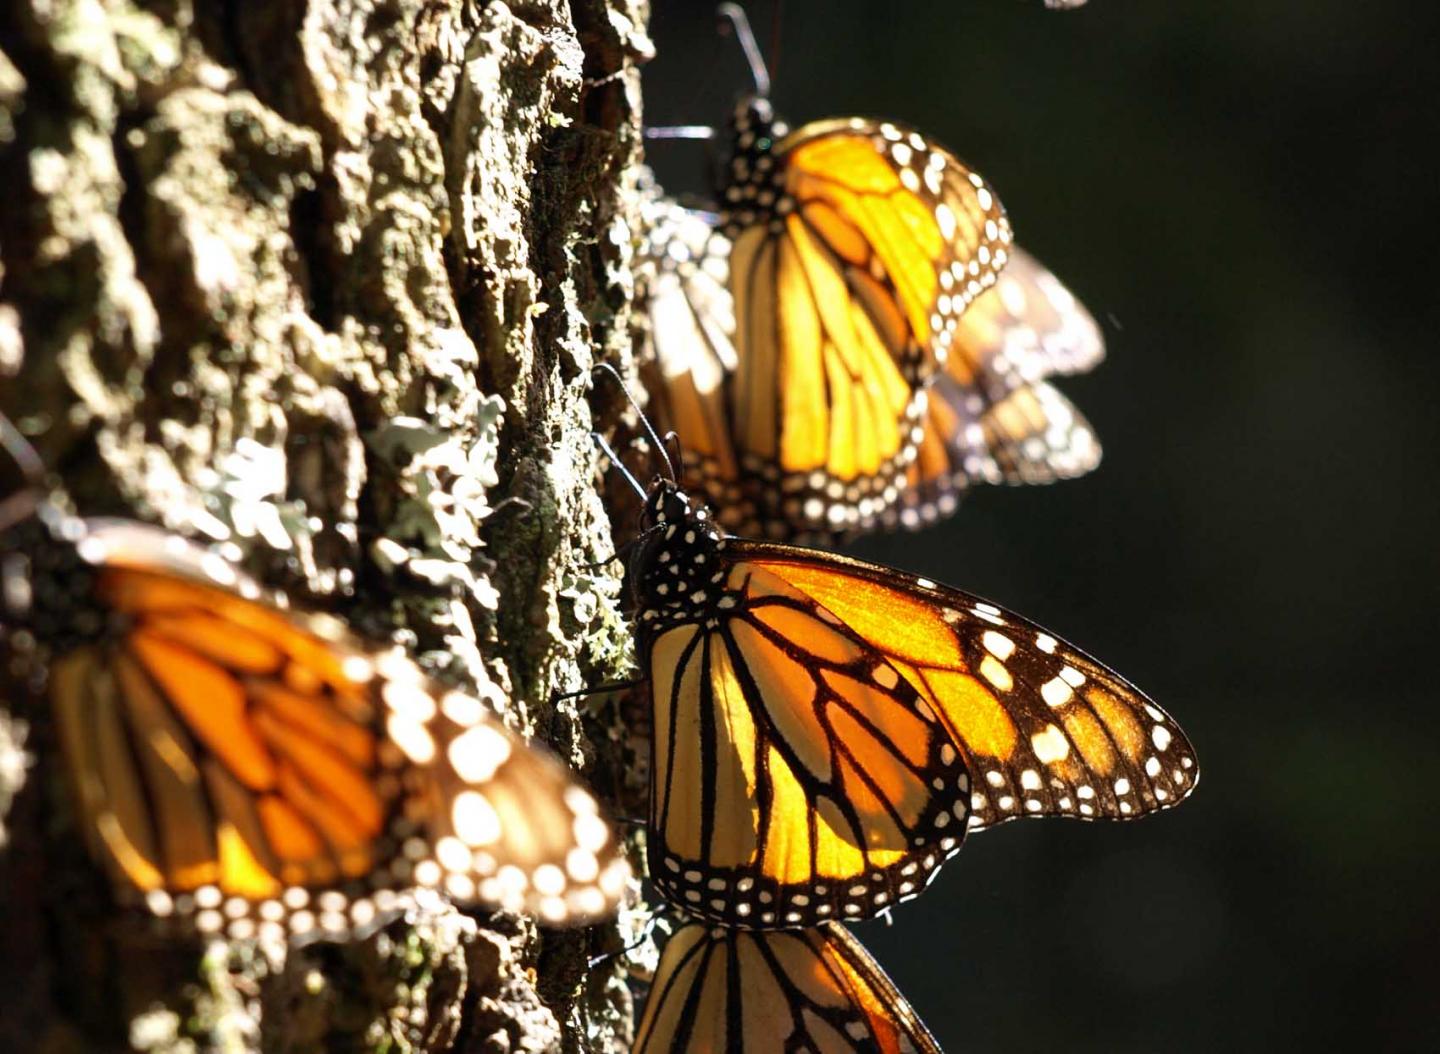 Monarch butterflies Monarch Buttecatching the sun on an oyamel tree in a Mexican overwintering site.